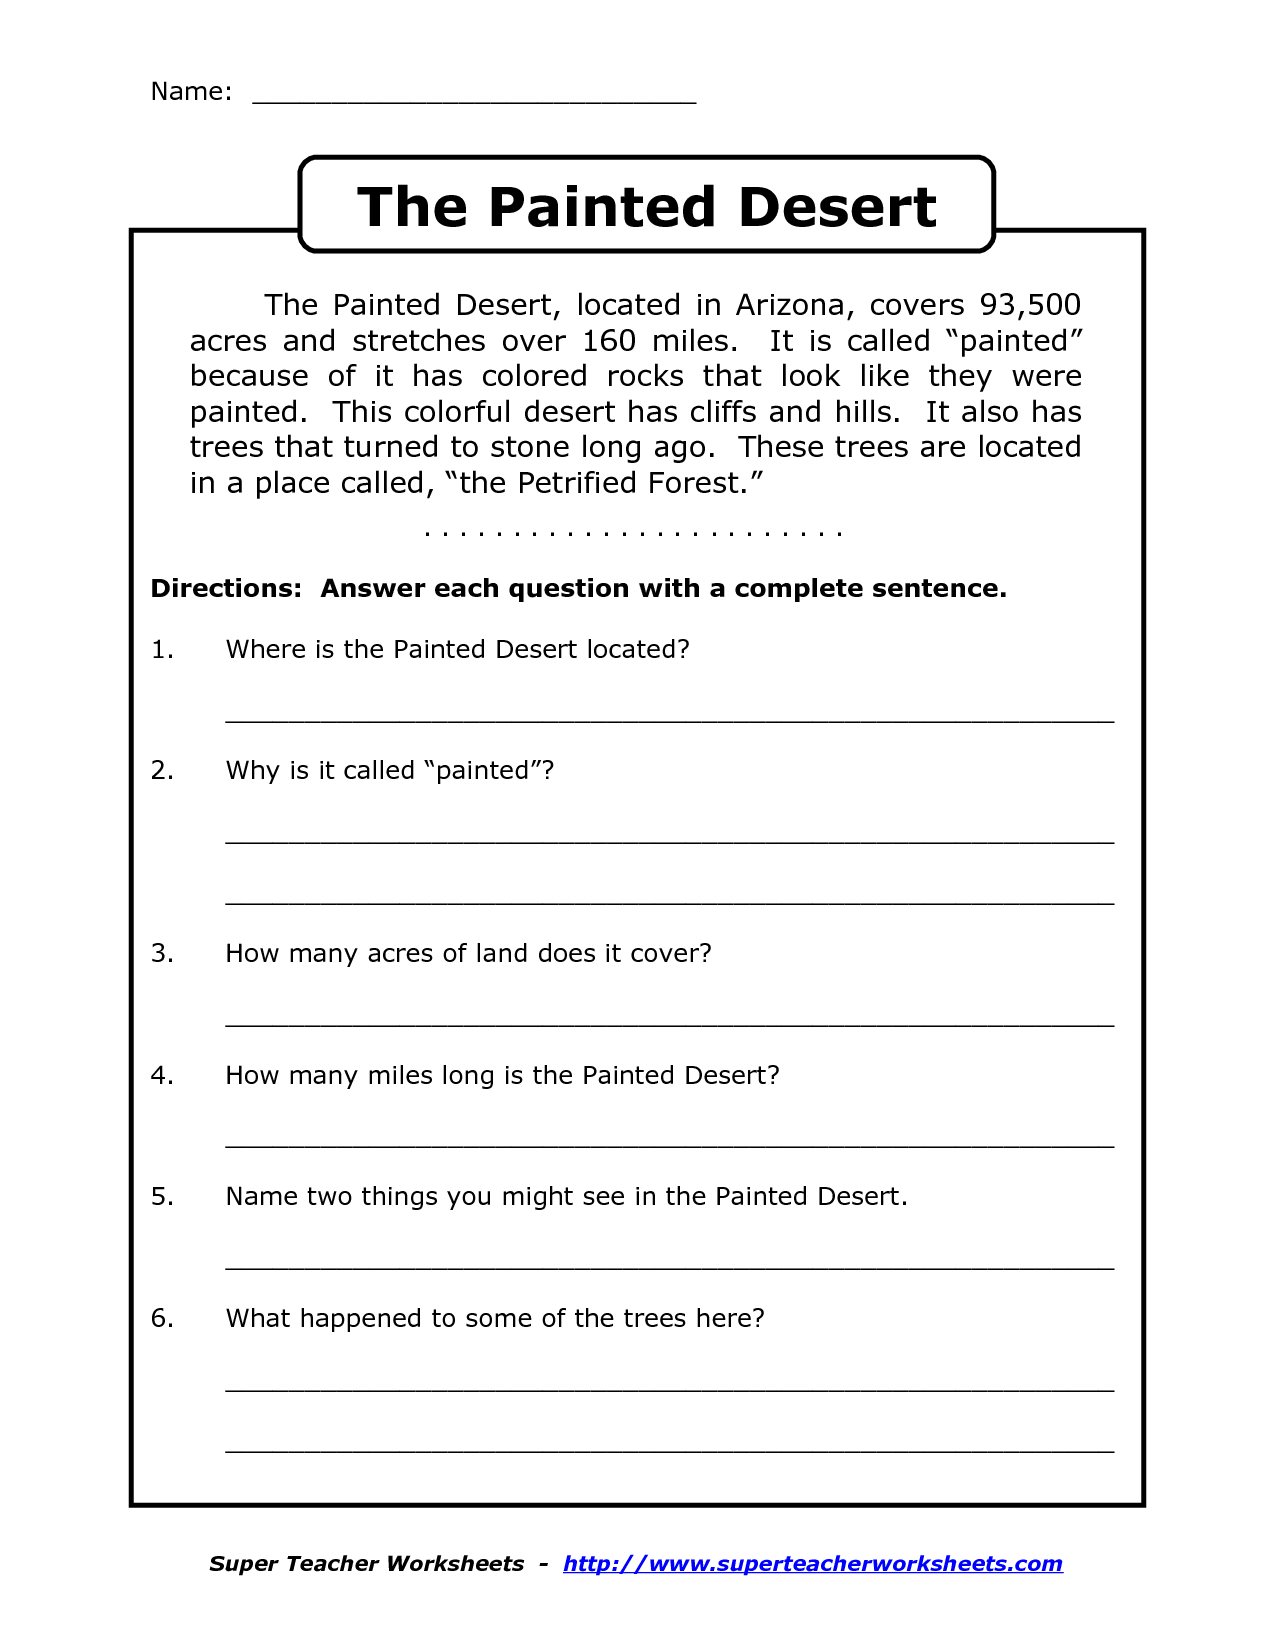 Free Printable Reading Comprehension Worksheets For 4Th Grade